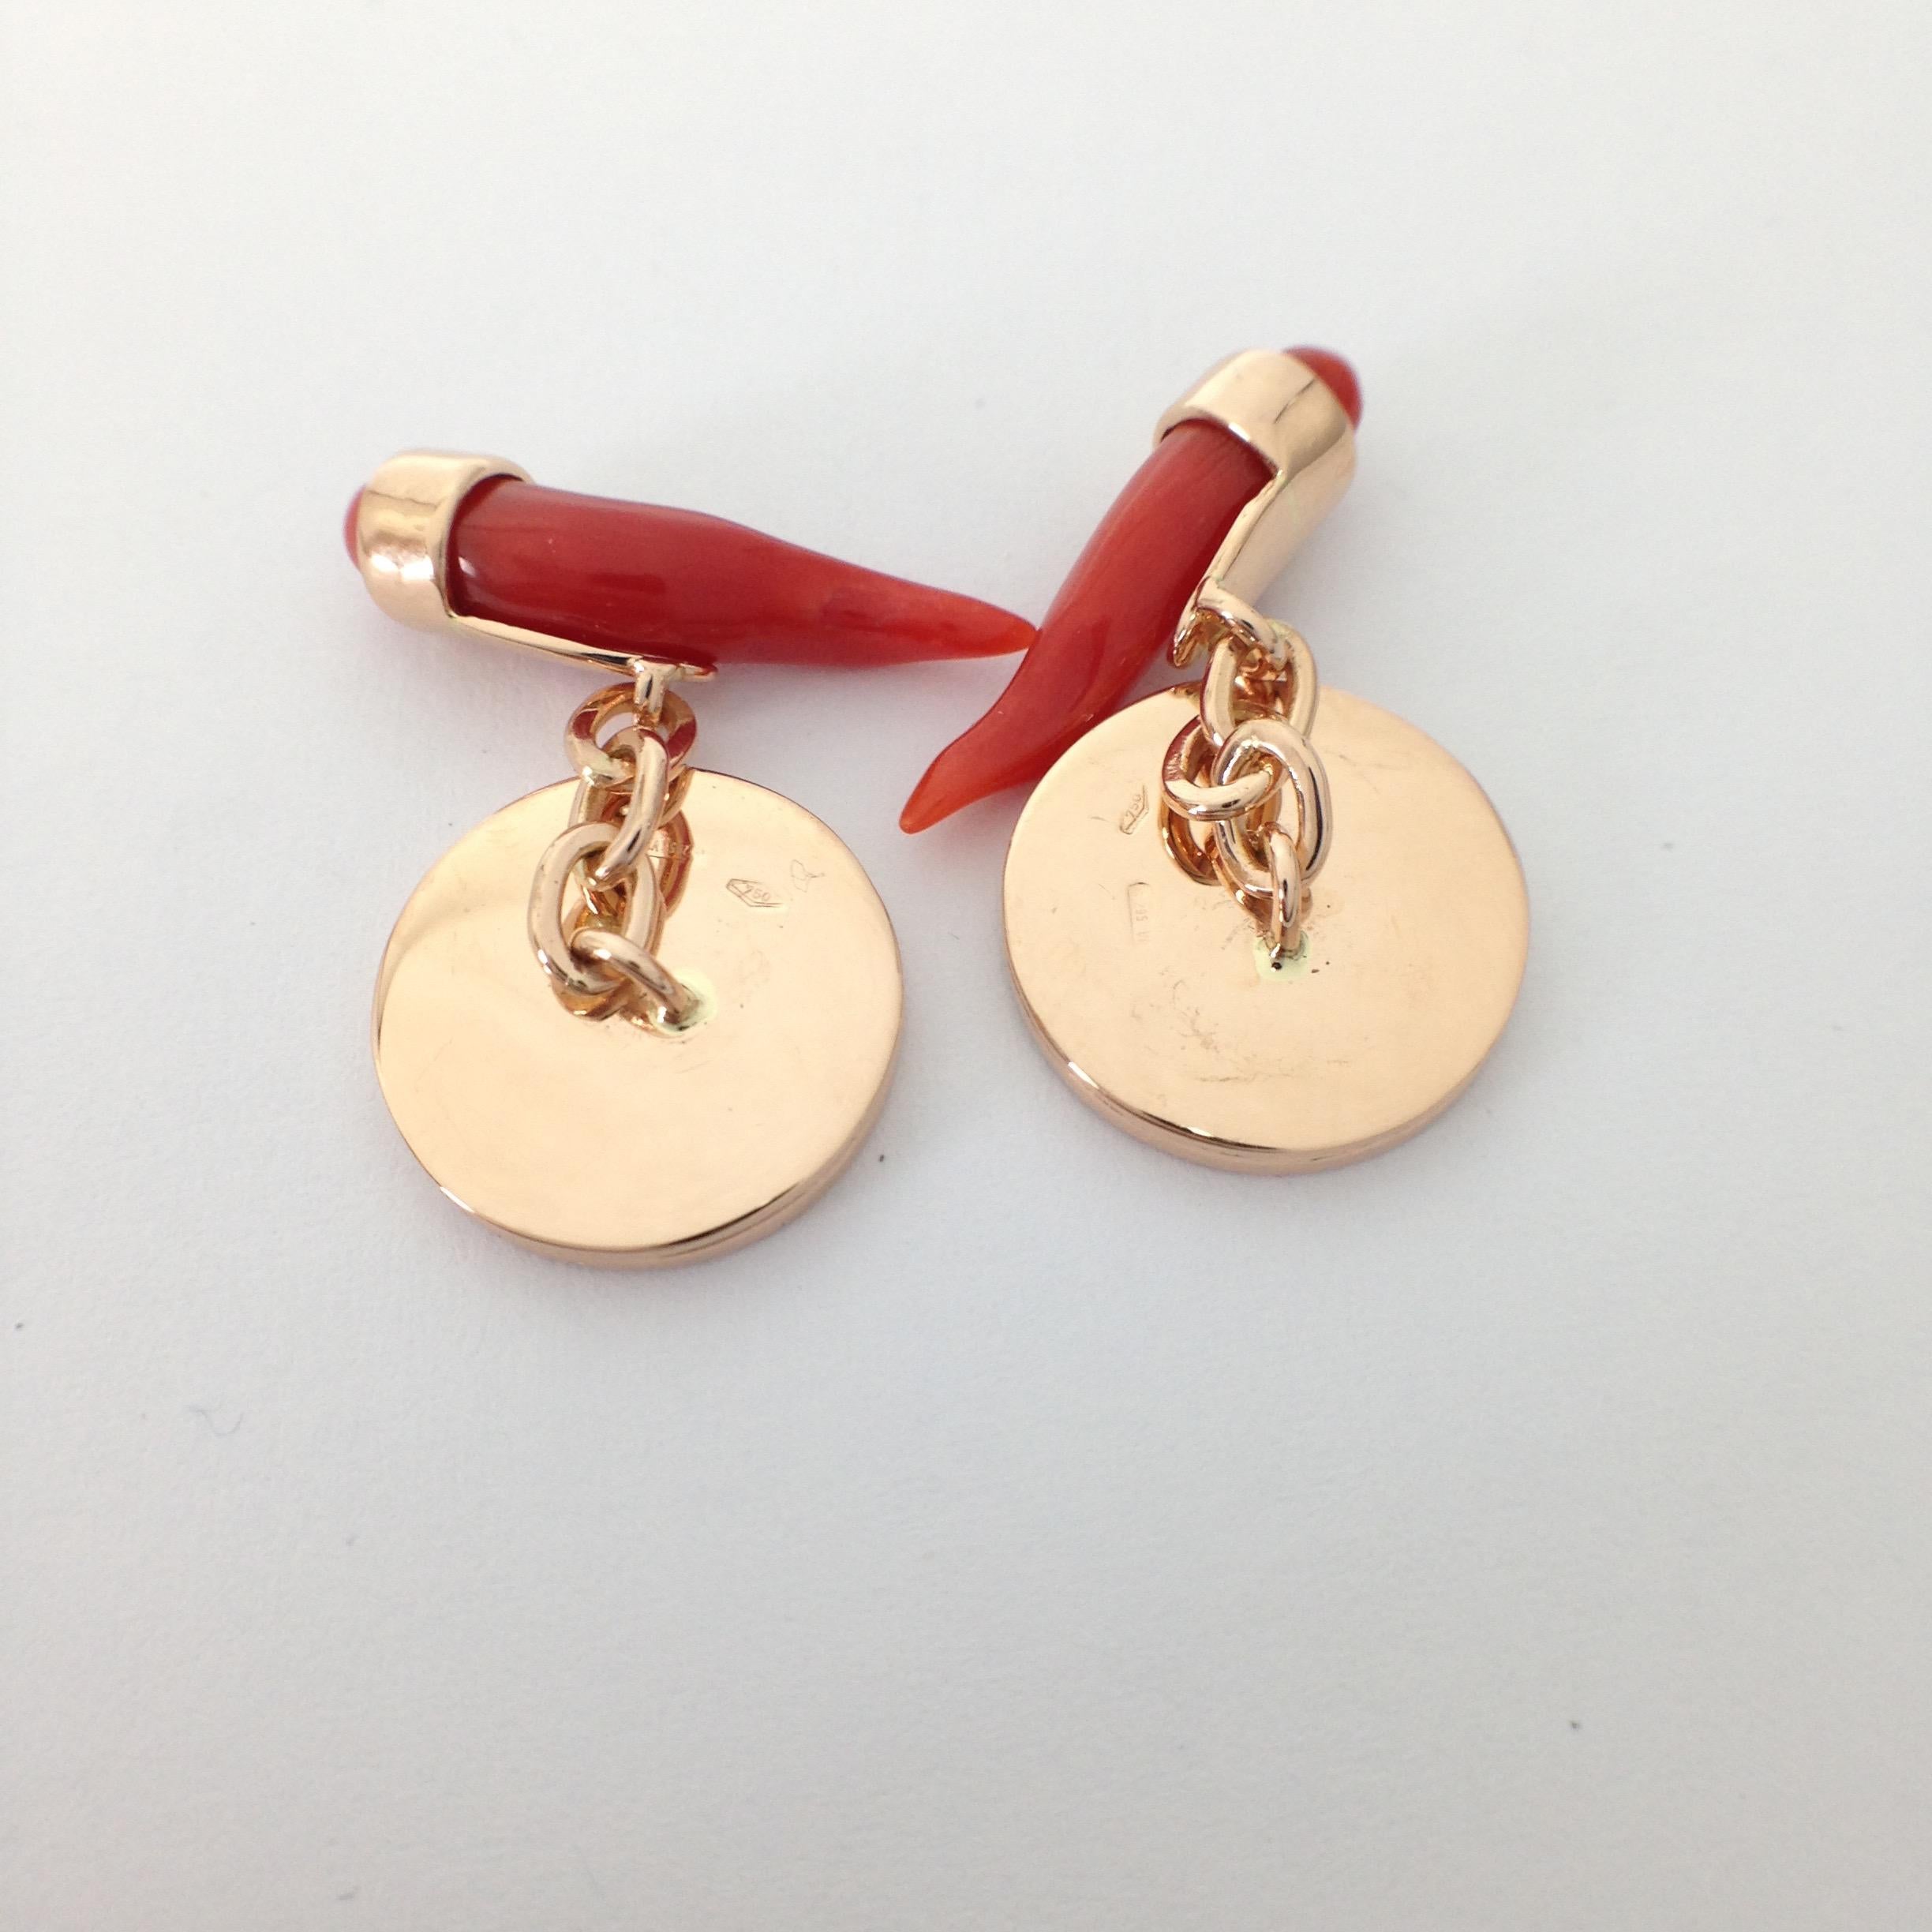 Petronilla Natural Red Coral 18Kt Red Gold Cufflinks Anchor Cameo Made in Italy
A pair of cufflinks inspired by the sea in red 18 Kt gold. 
There is a small cameo connected by a chain to a natural red coral horn for each cufflink.
This items is